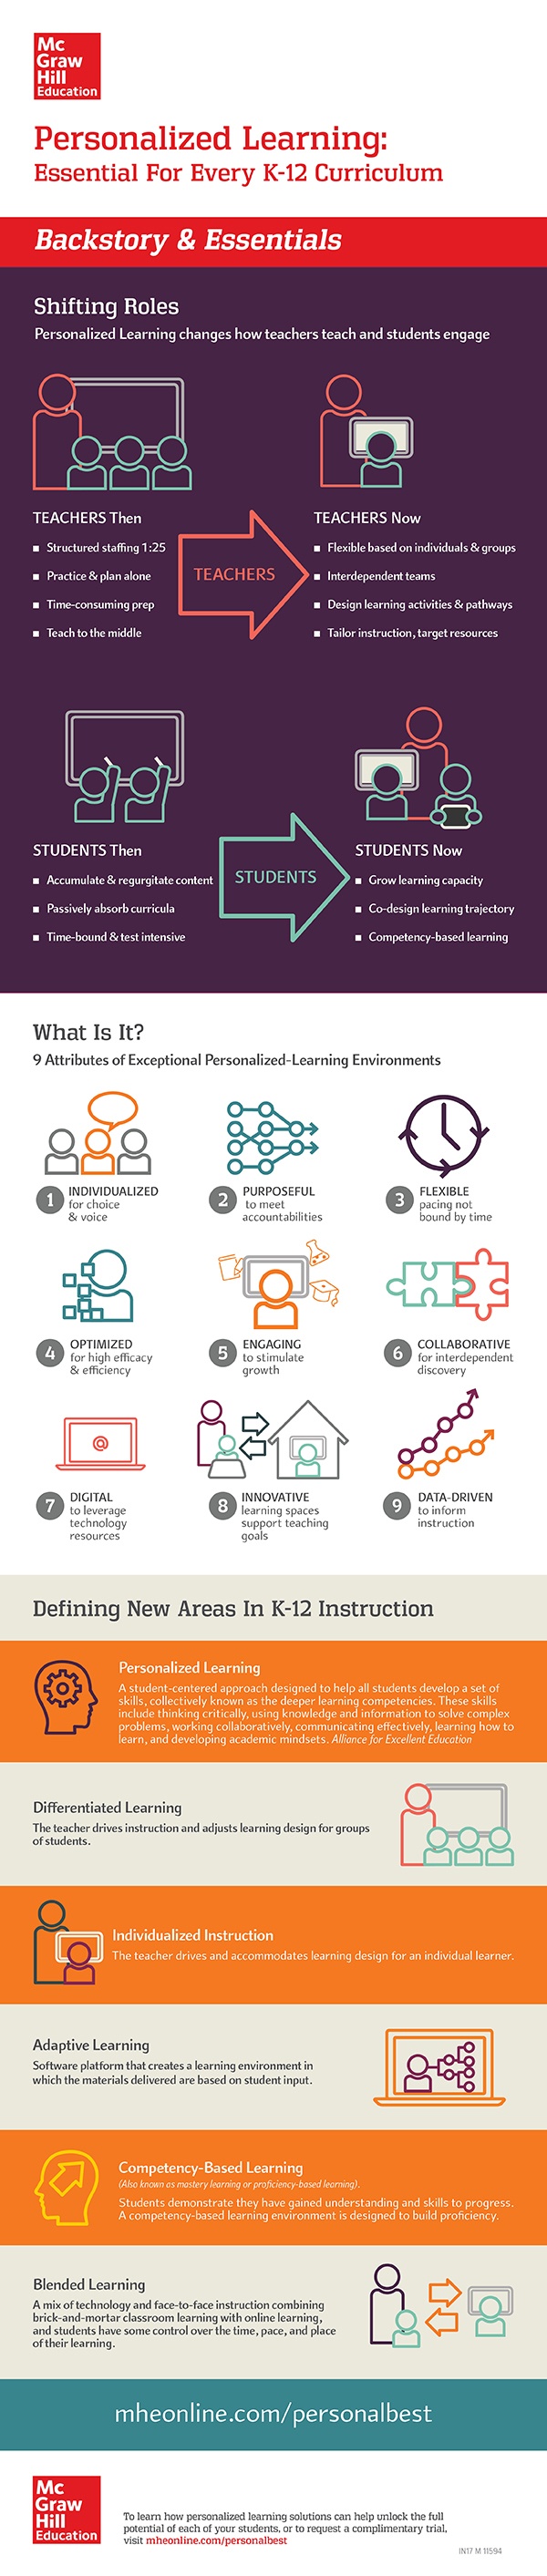 Personalized Learning: Backstory & Essentials Infographic